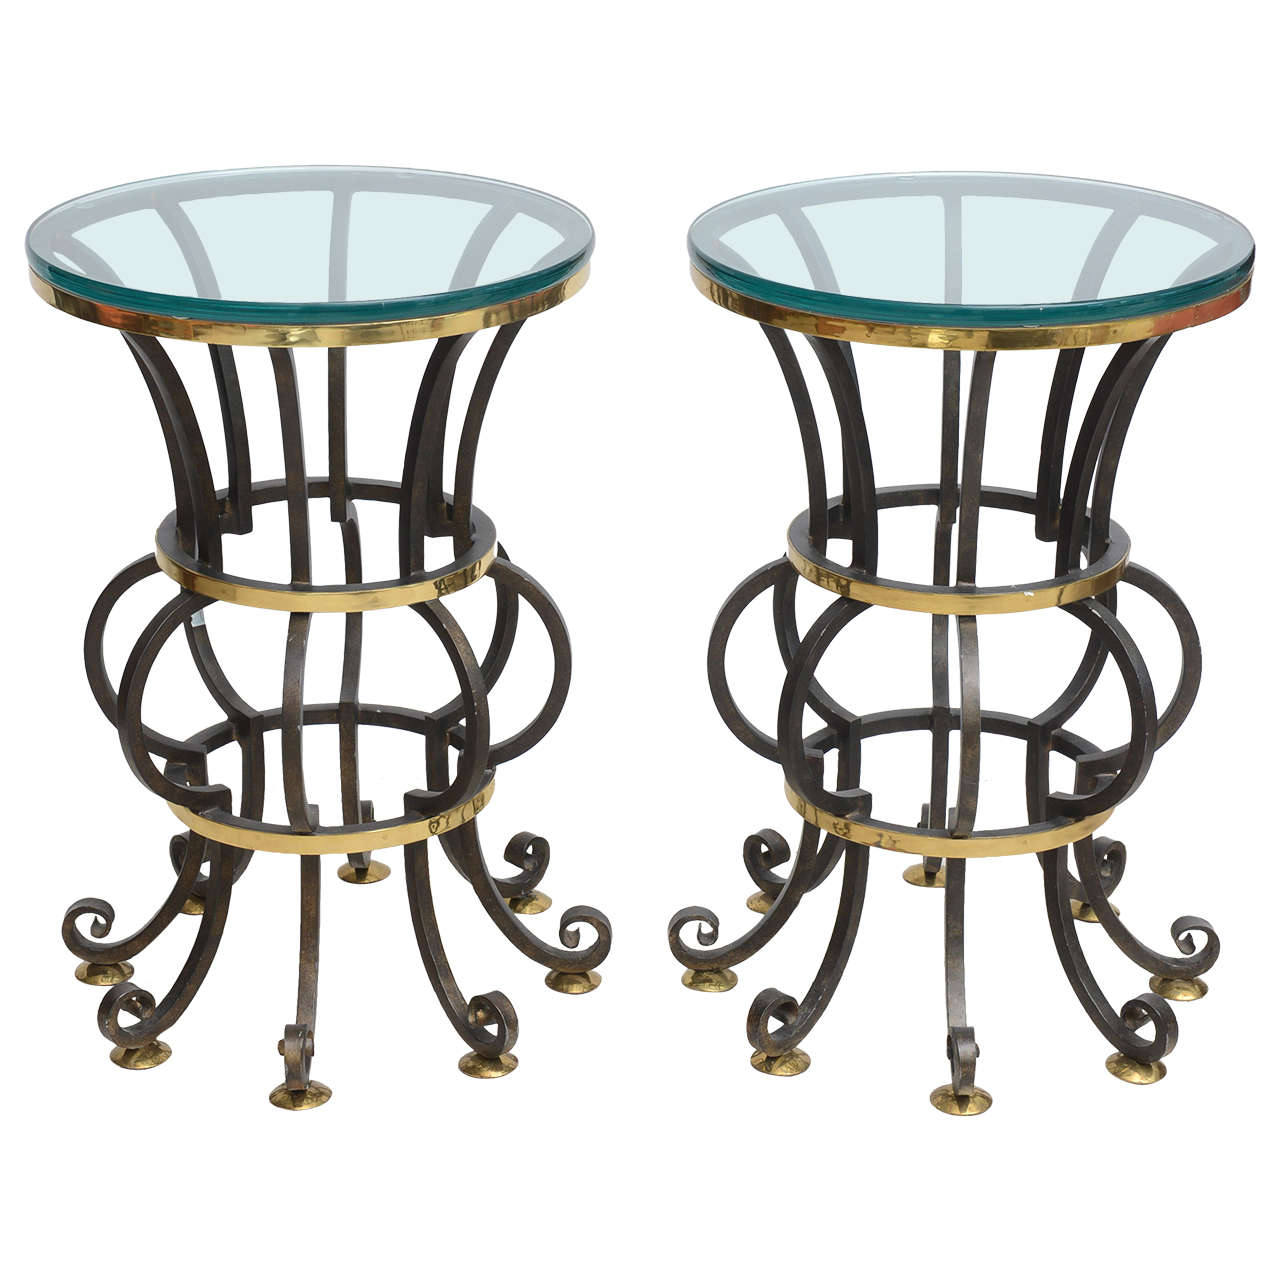 Pair of Iron and Brass with Glass Top Tables by Arturo Pani For Sale